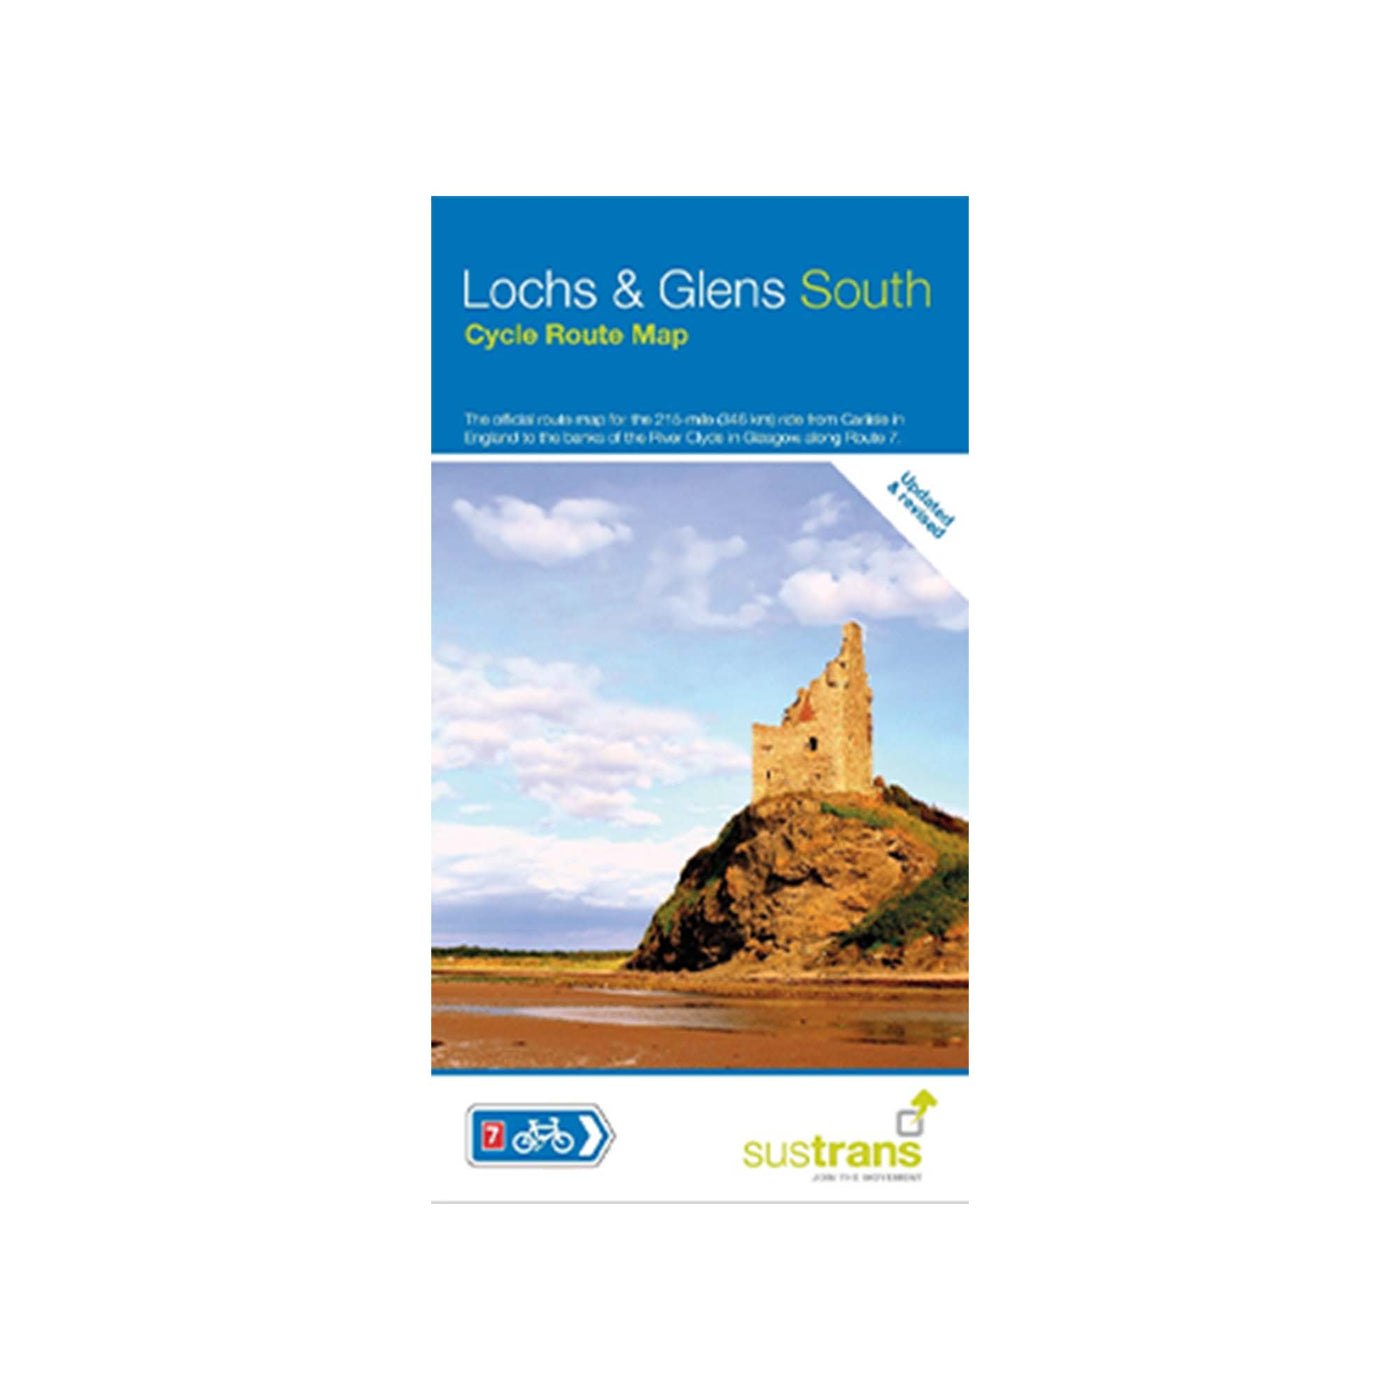 Lochs and Glens South Cycle Route Map. The official route map for the 215-mile (346km) ride from Carlisle in England to the banks of the River Clyde in Glasgow 